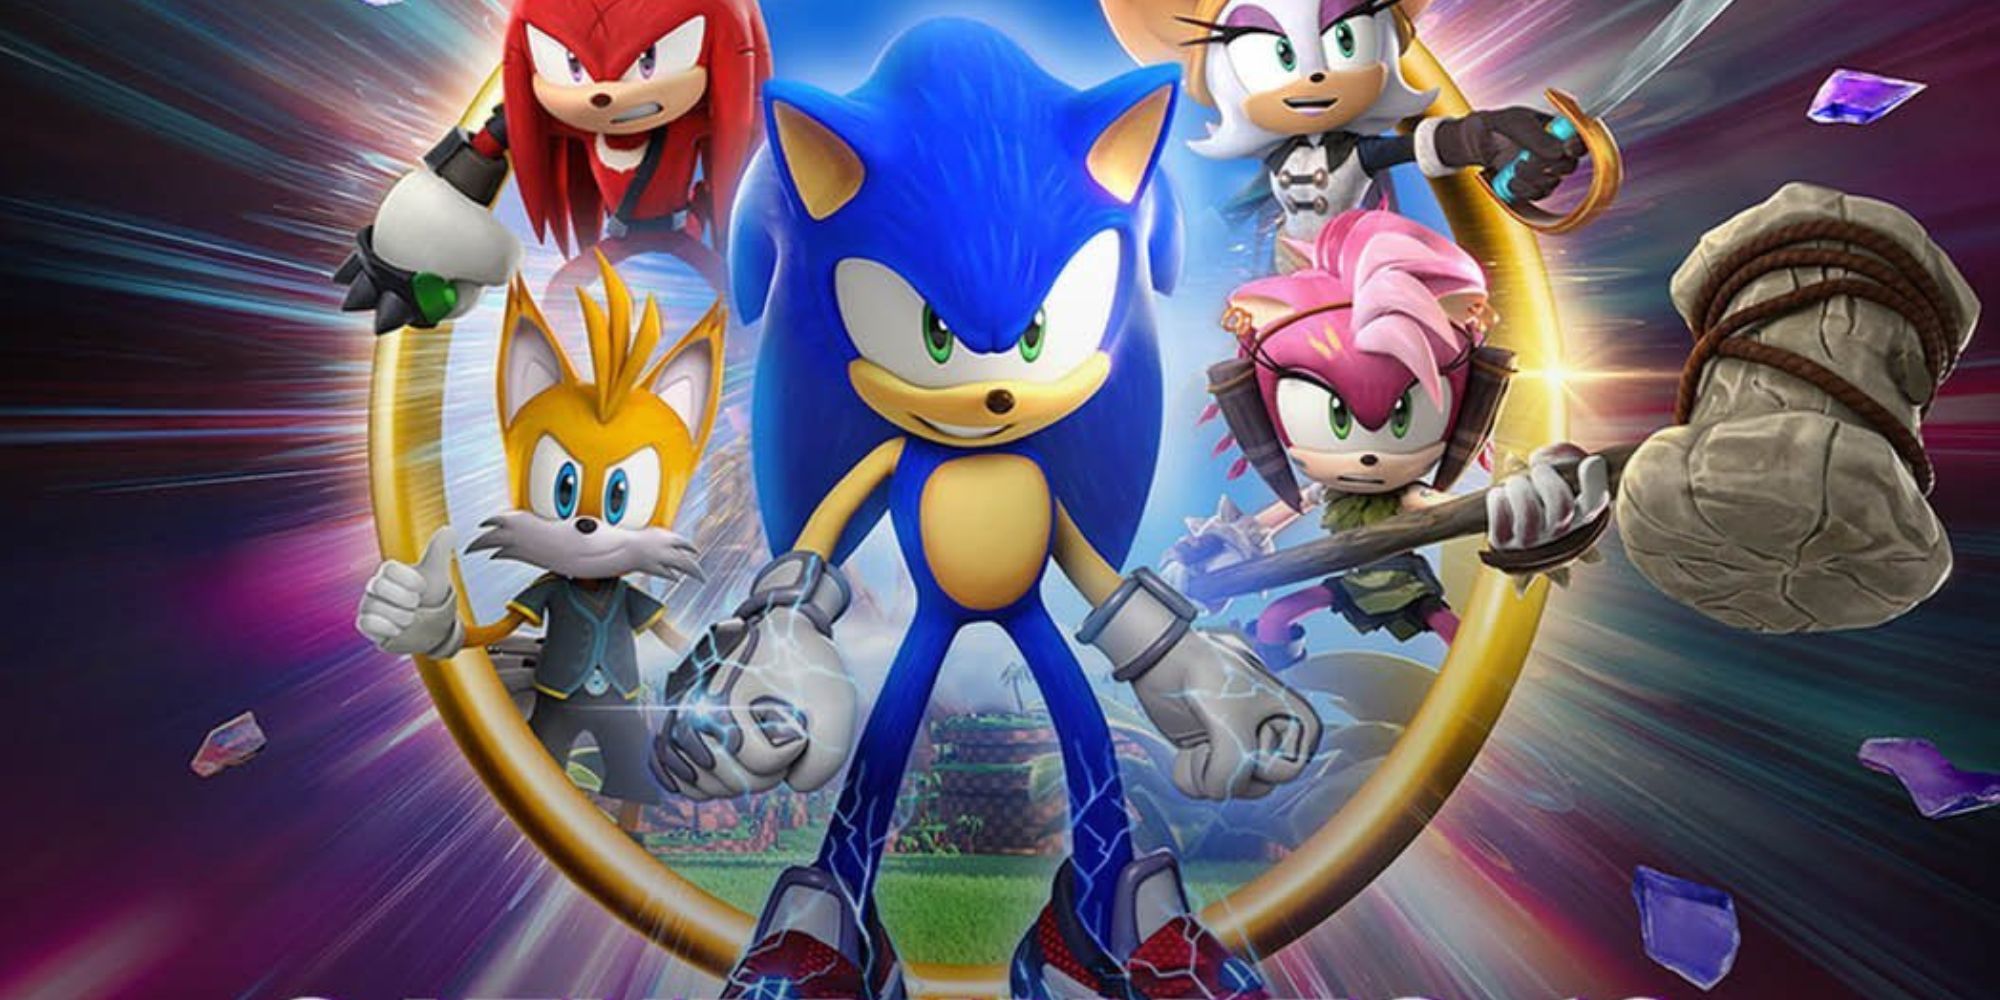 Sonic the Hedgehog Is Getting an Official New Game Inside Roblox - IGN